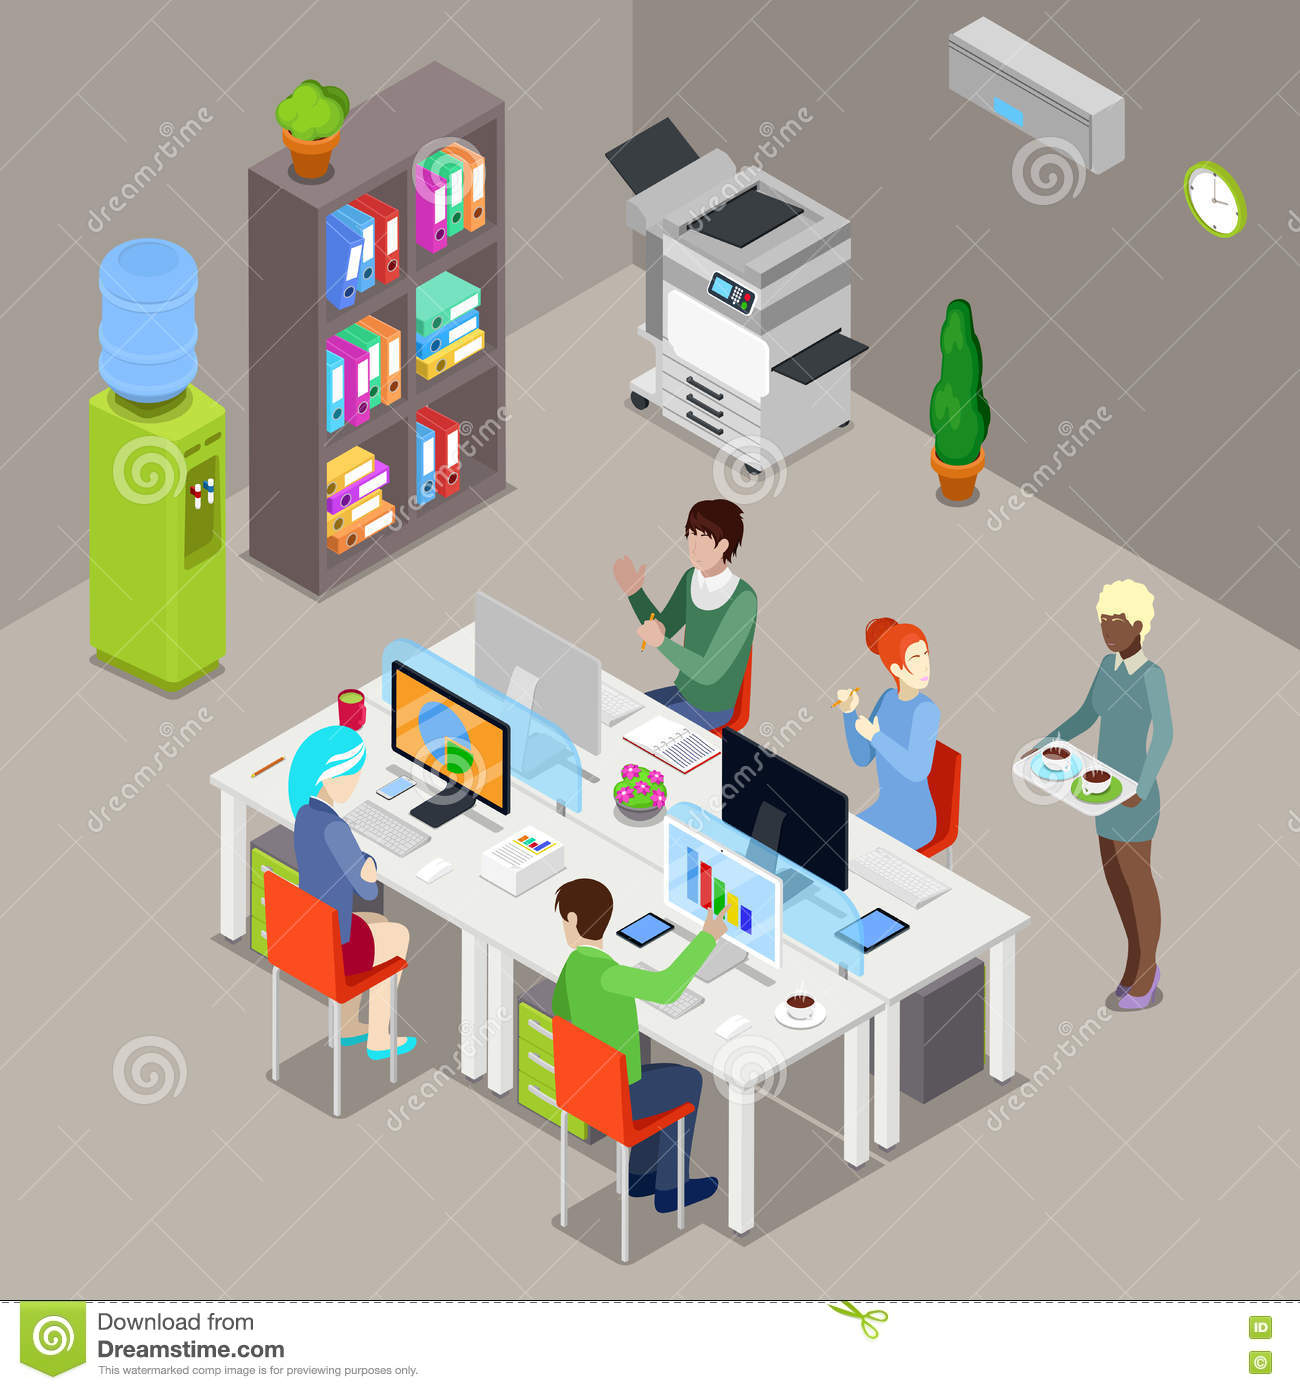 free clipart office space - photo #7